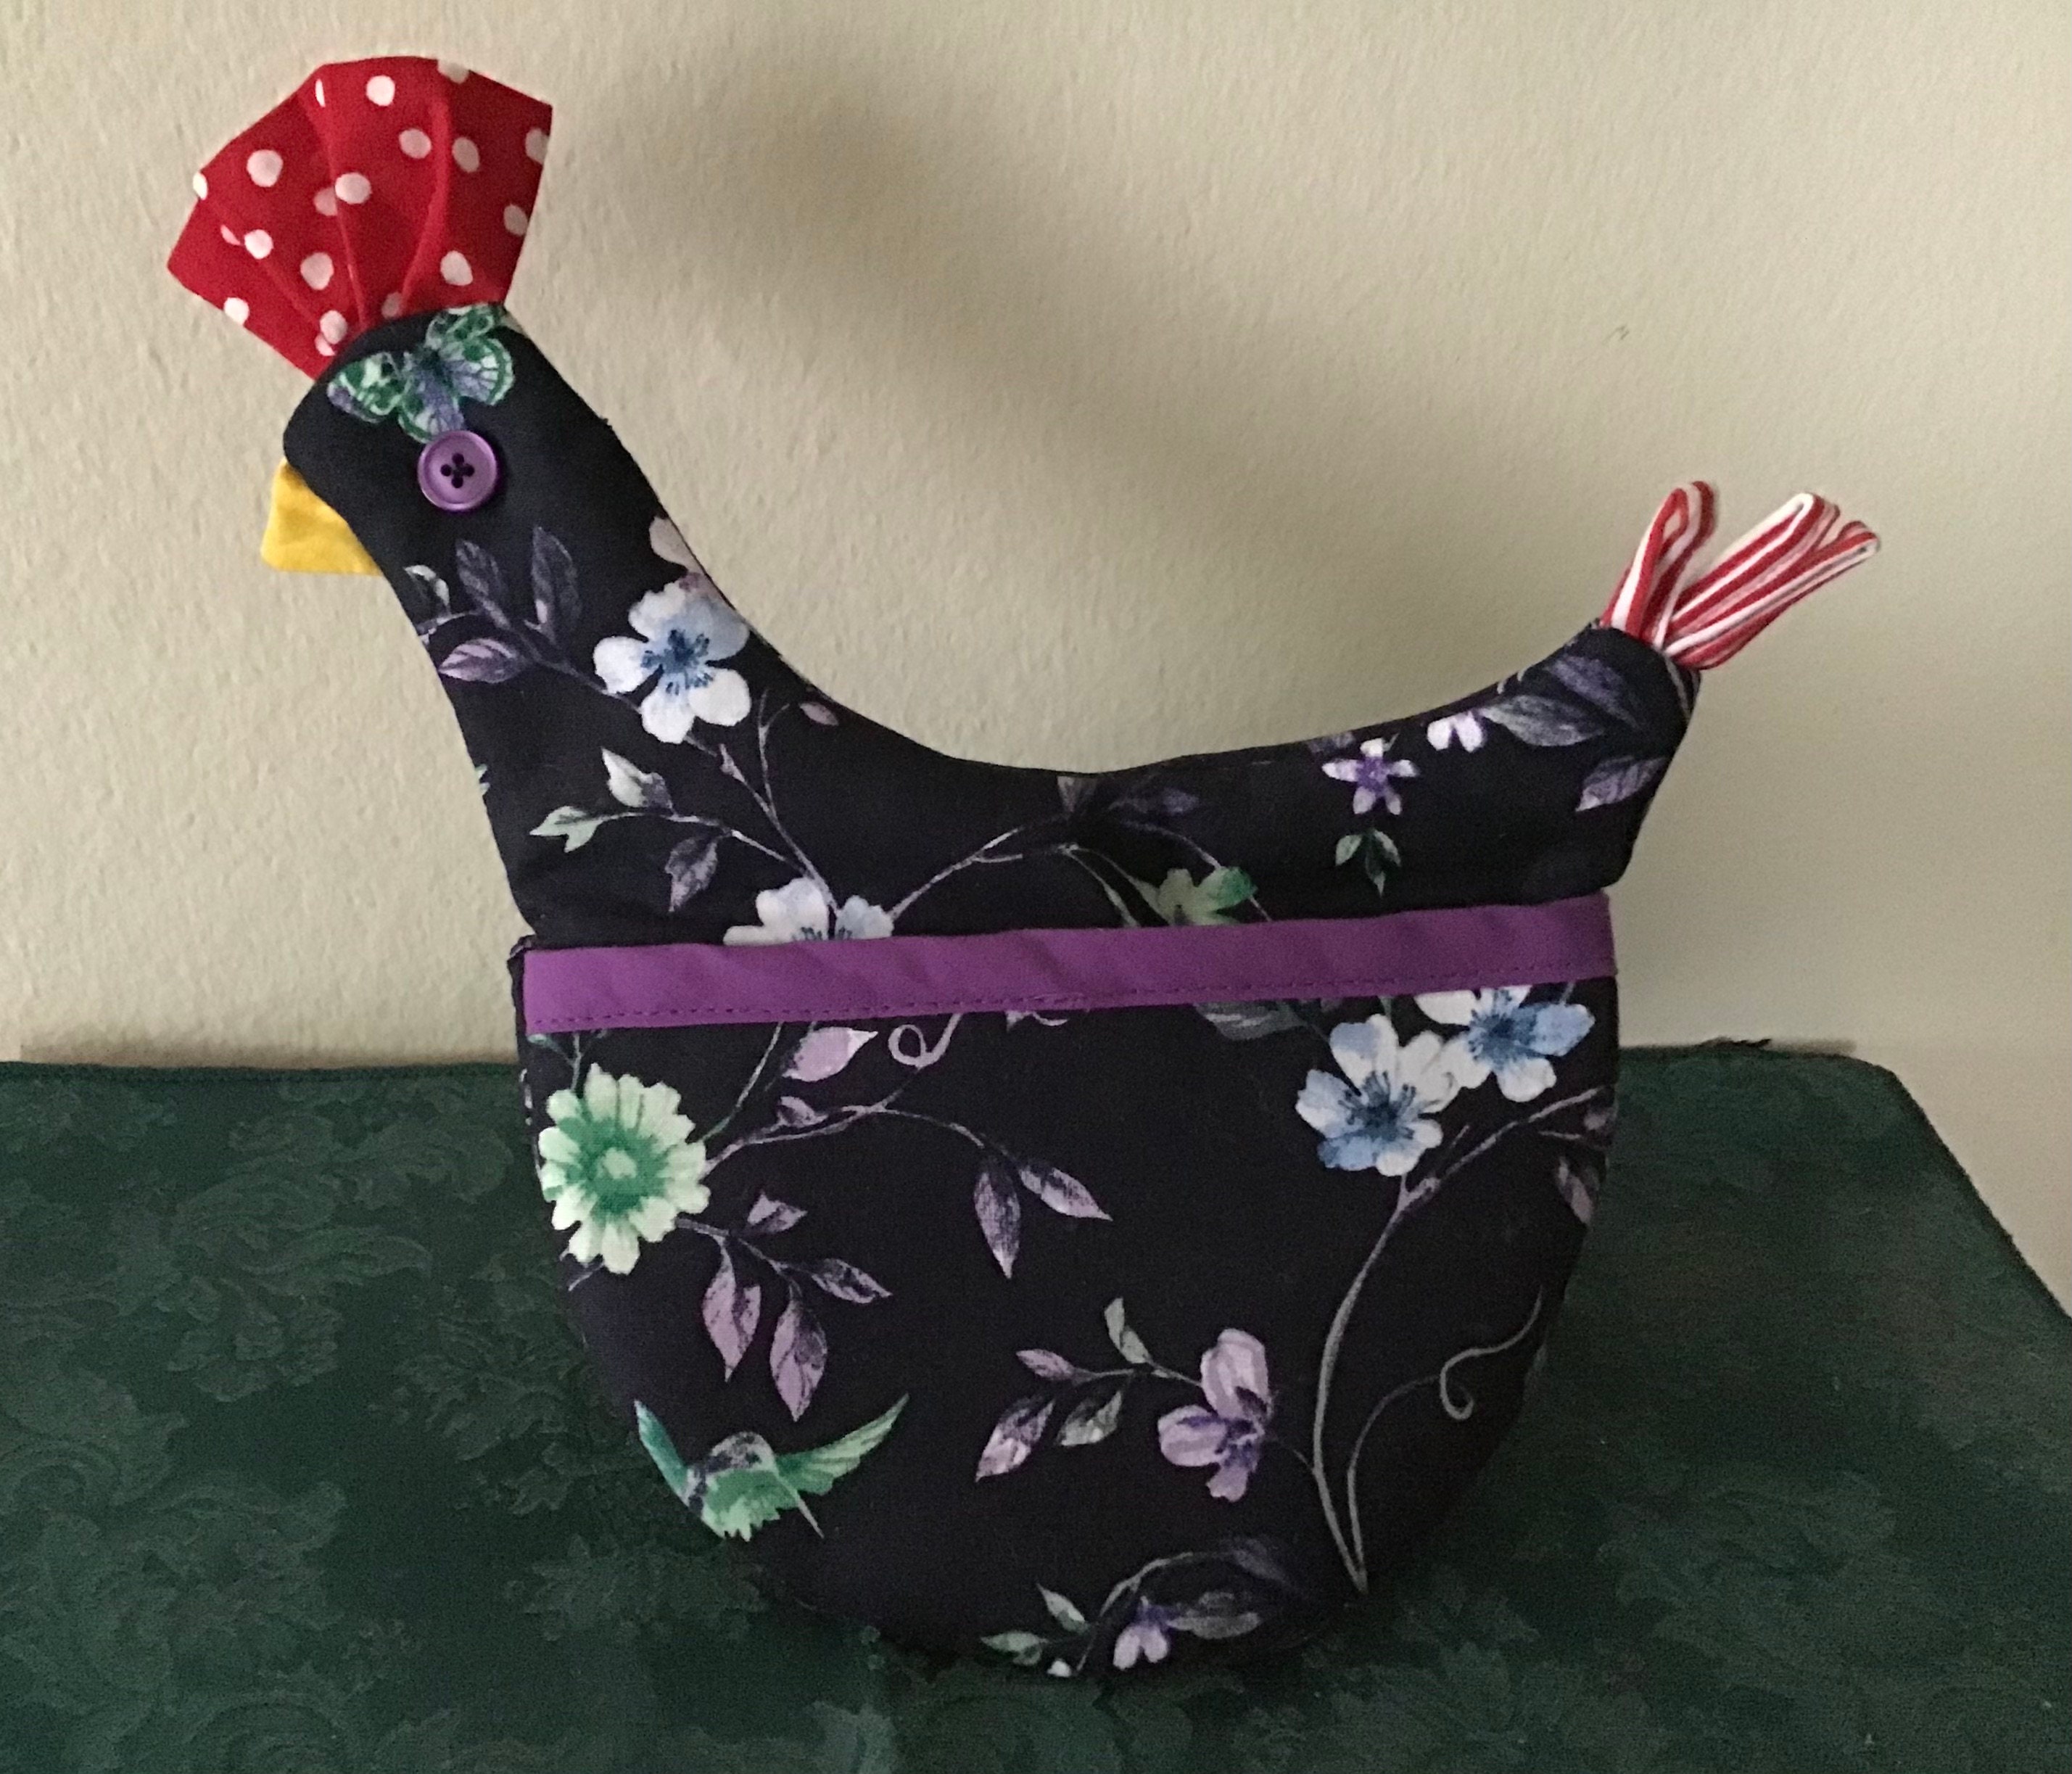 Funny Rooster Oven Mitt, Rooster Trim Oven Mitts, Rooster Decorate Oven  Mitts/Rooster Printed Oven Mitts, Washable Cute Oven Mitts for Baking  Cooking